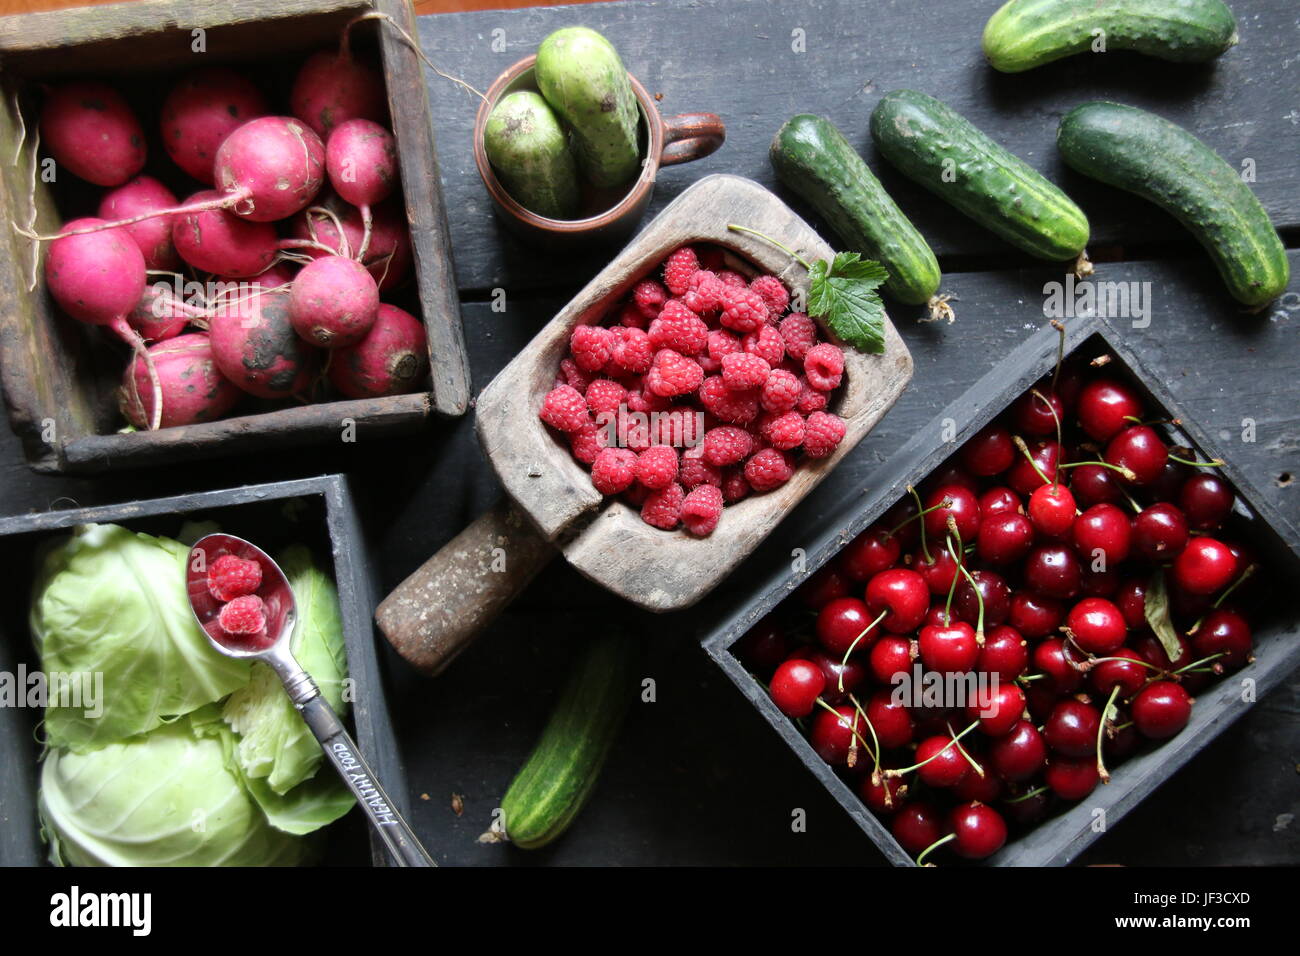 Healthy eating, food, dieting and vegetarian concept. Berries and vegetables on the table. Stock Photo